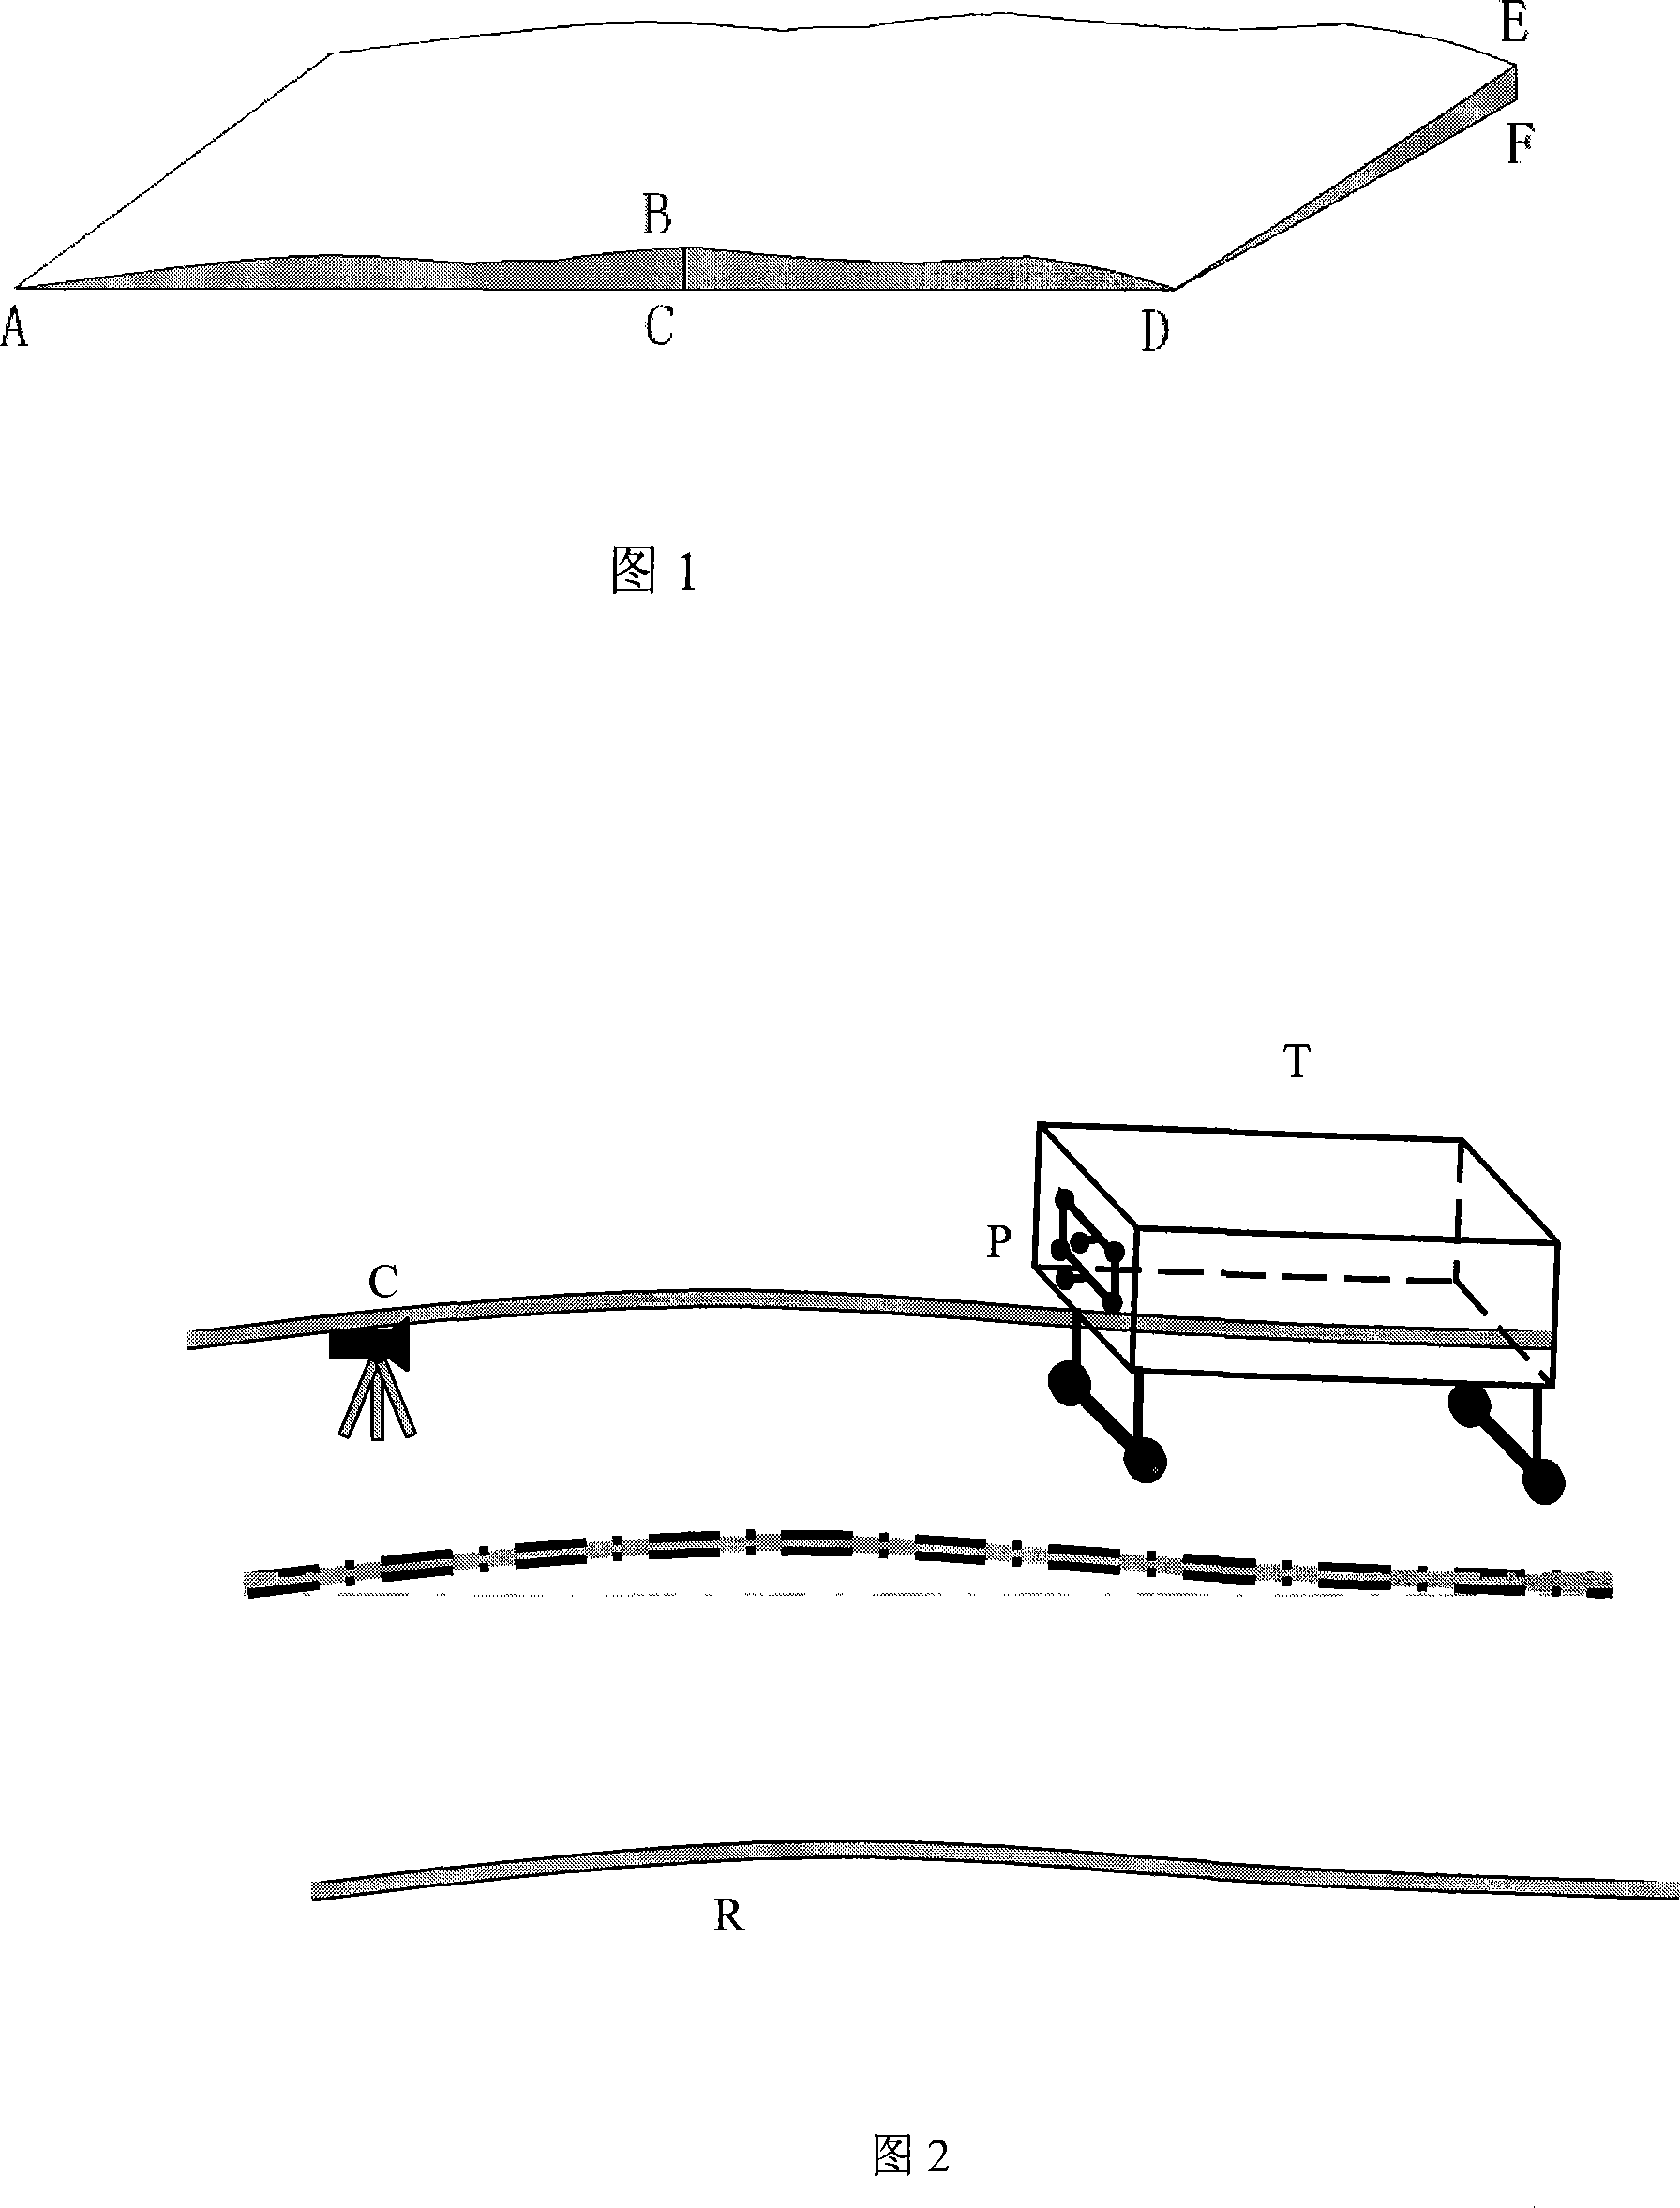 Pick-up measuring method for checking road surface planeness